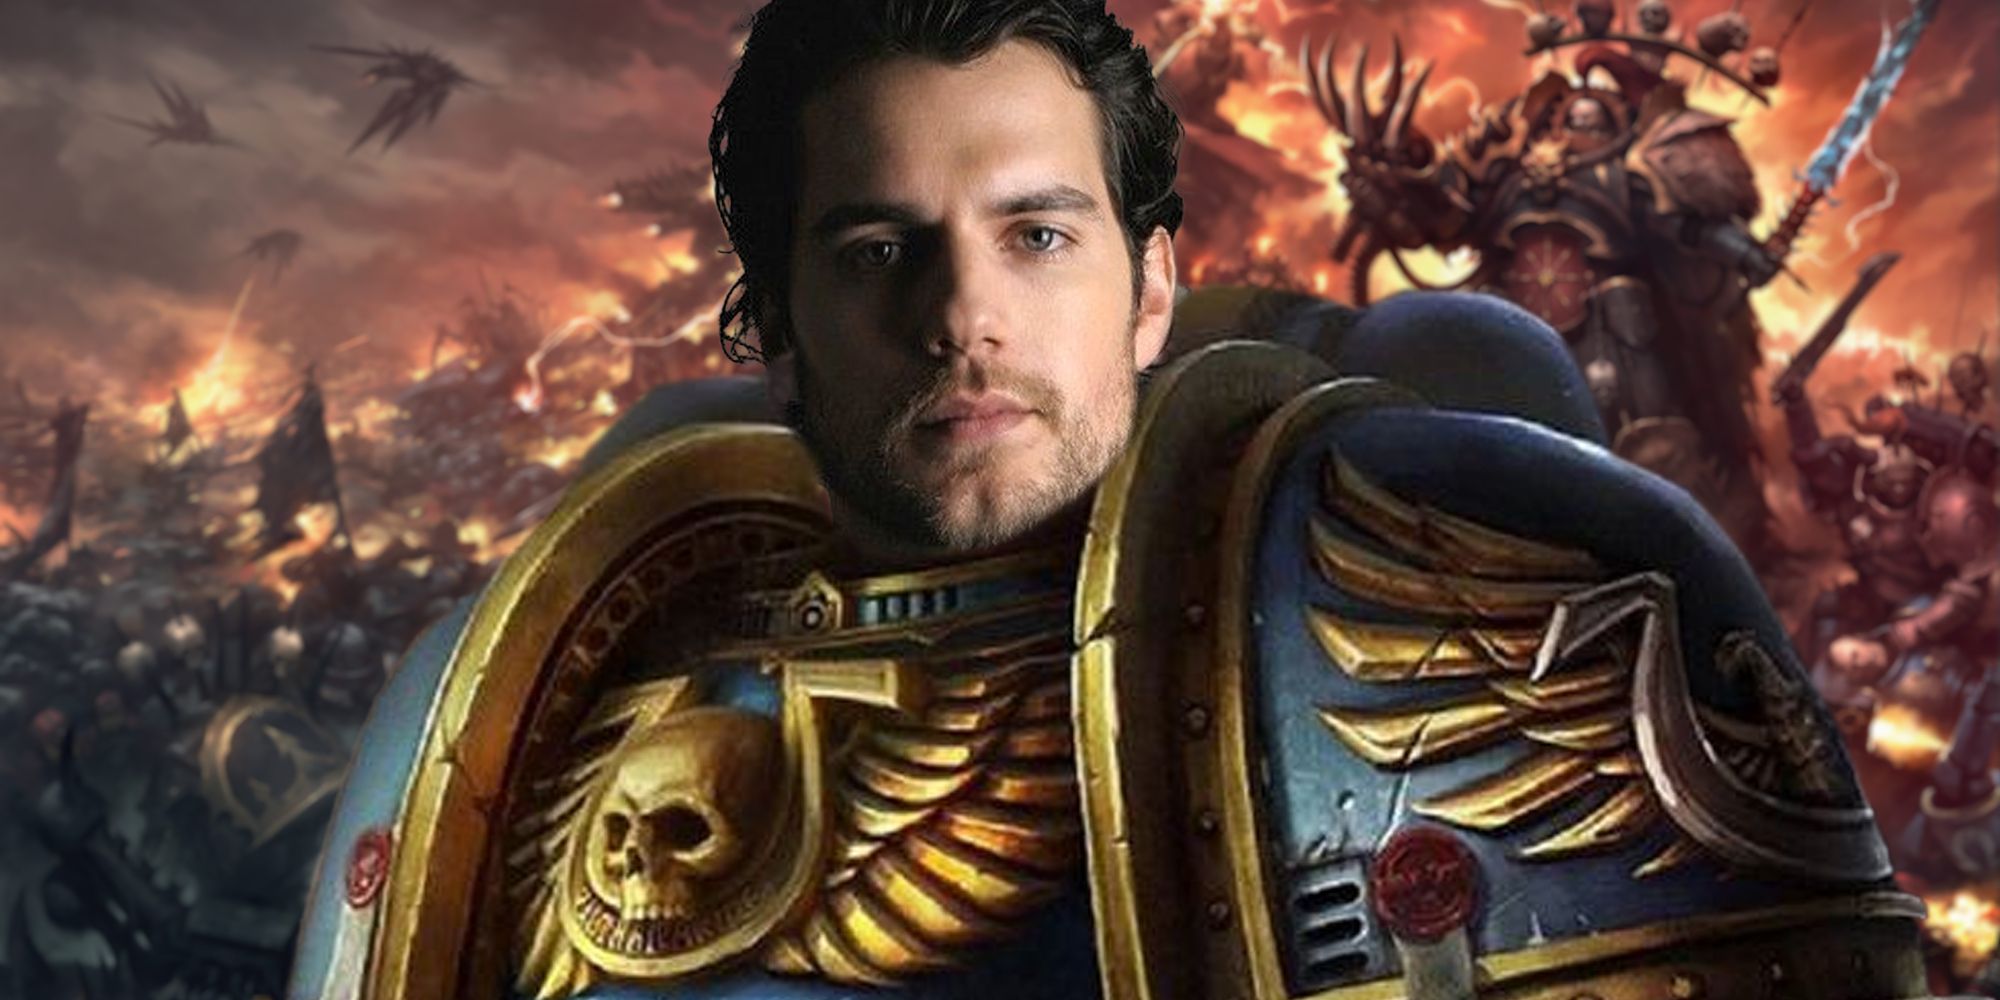 Henry Cavill in Warhammer armour